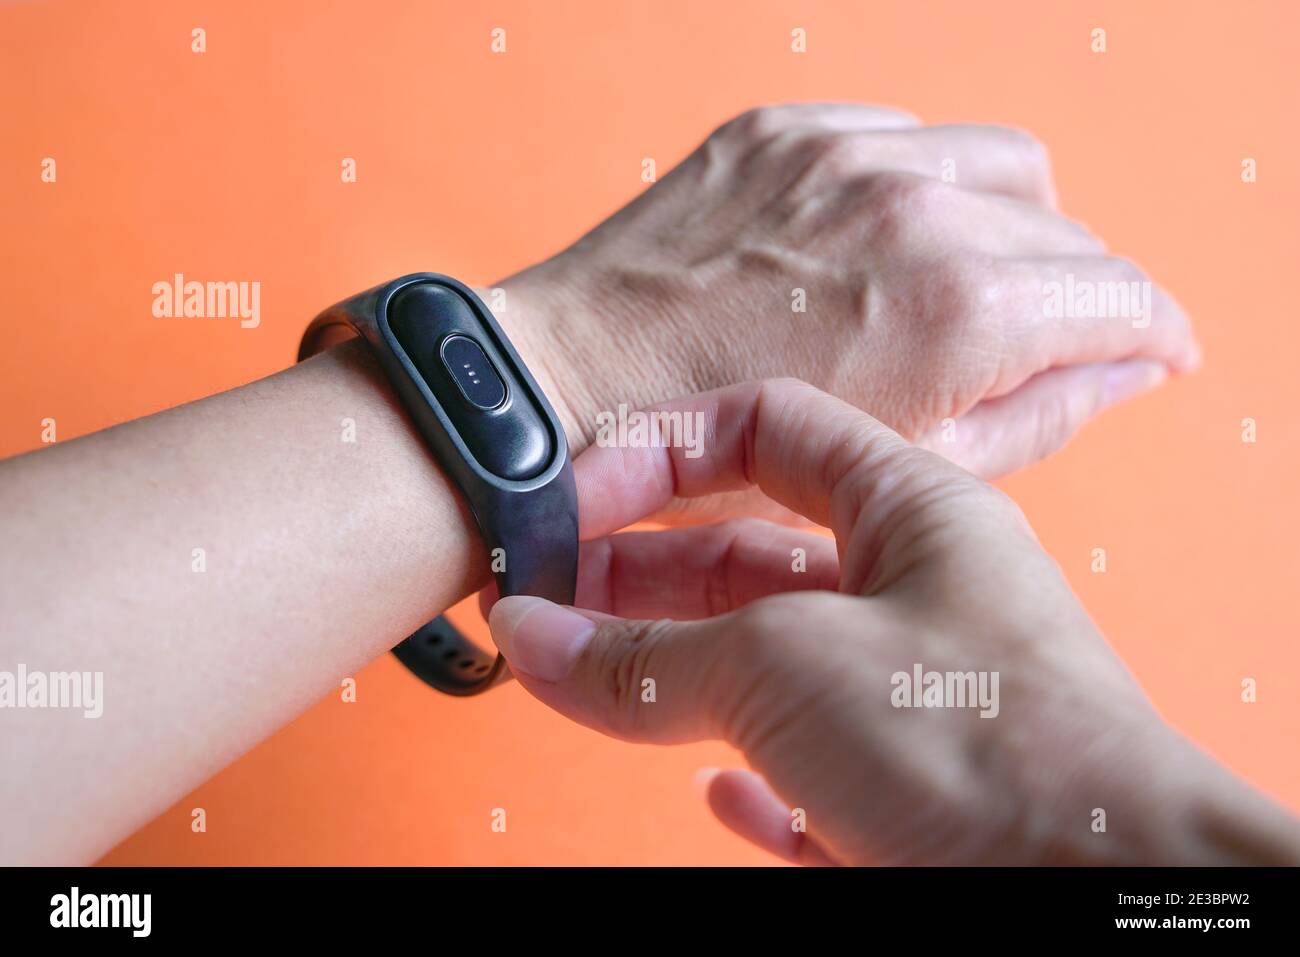 Woman wearing intelligent health watch on her wrist. Close up view. Stock Photo